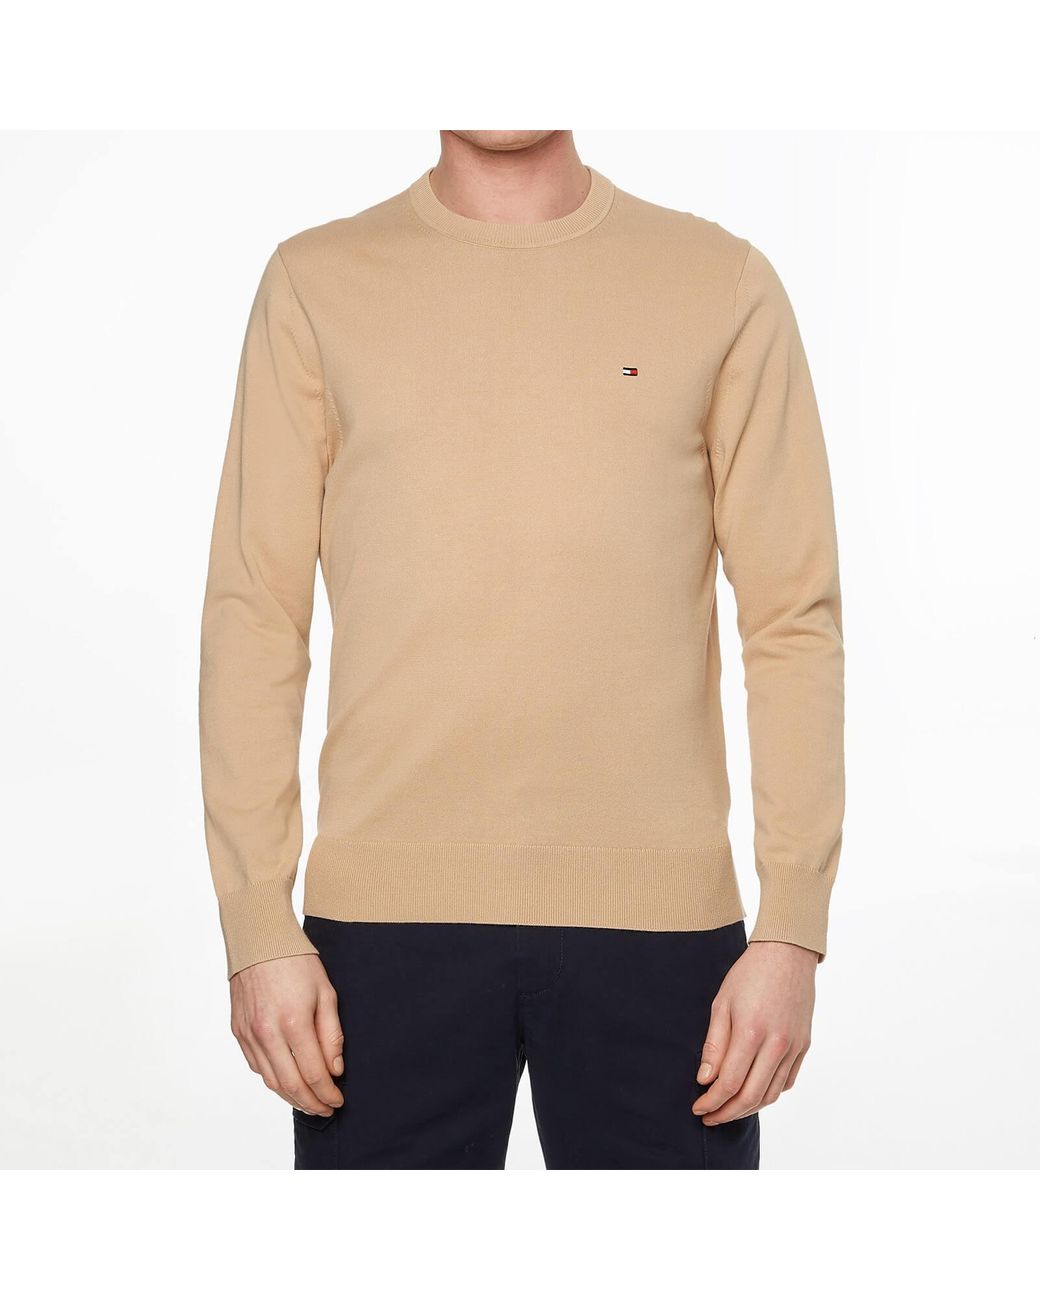 Tommy Hilfiger 1985 Crew Neck Sweater in Natural for Men | Lyst